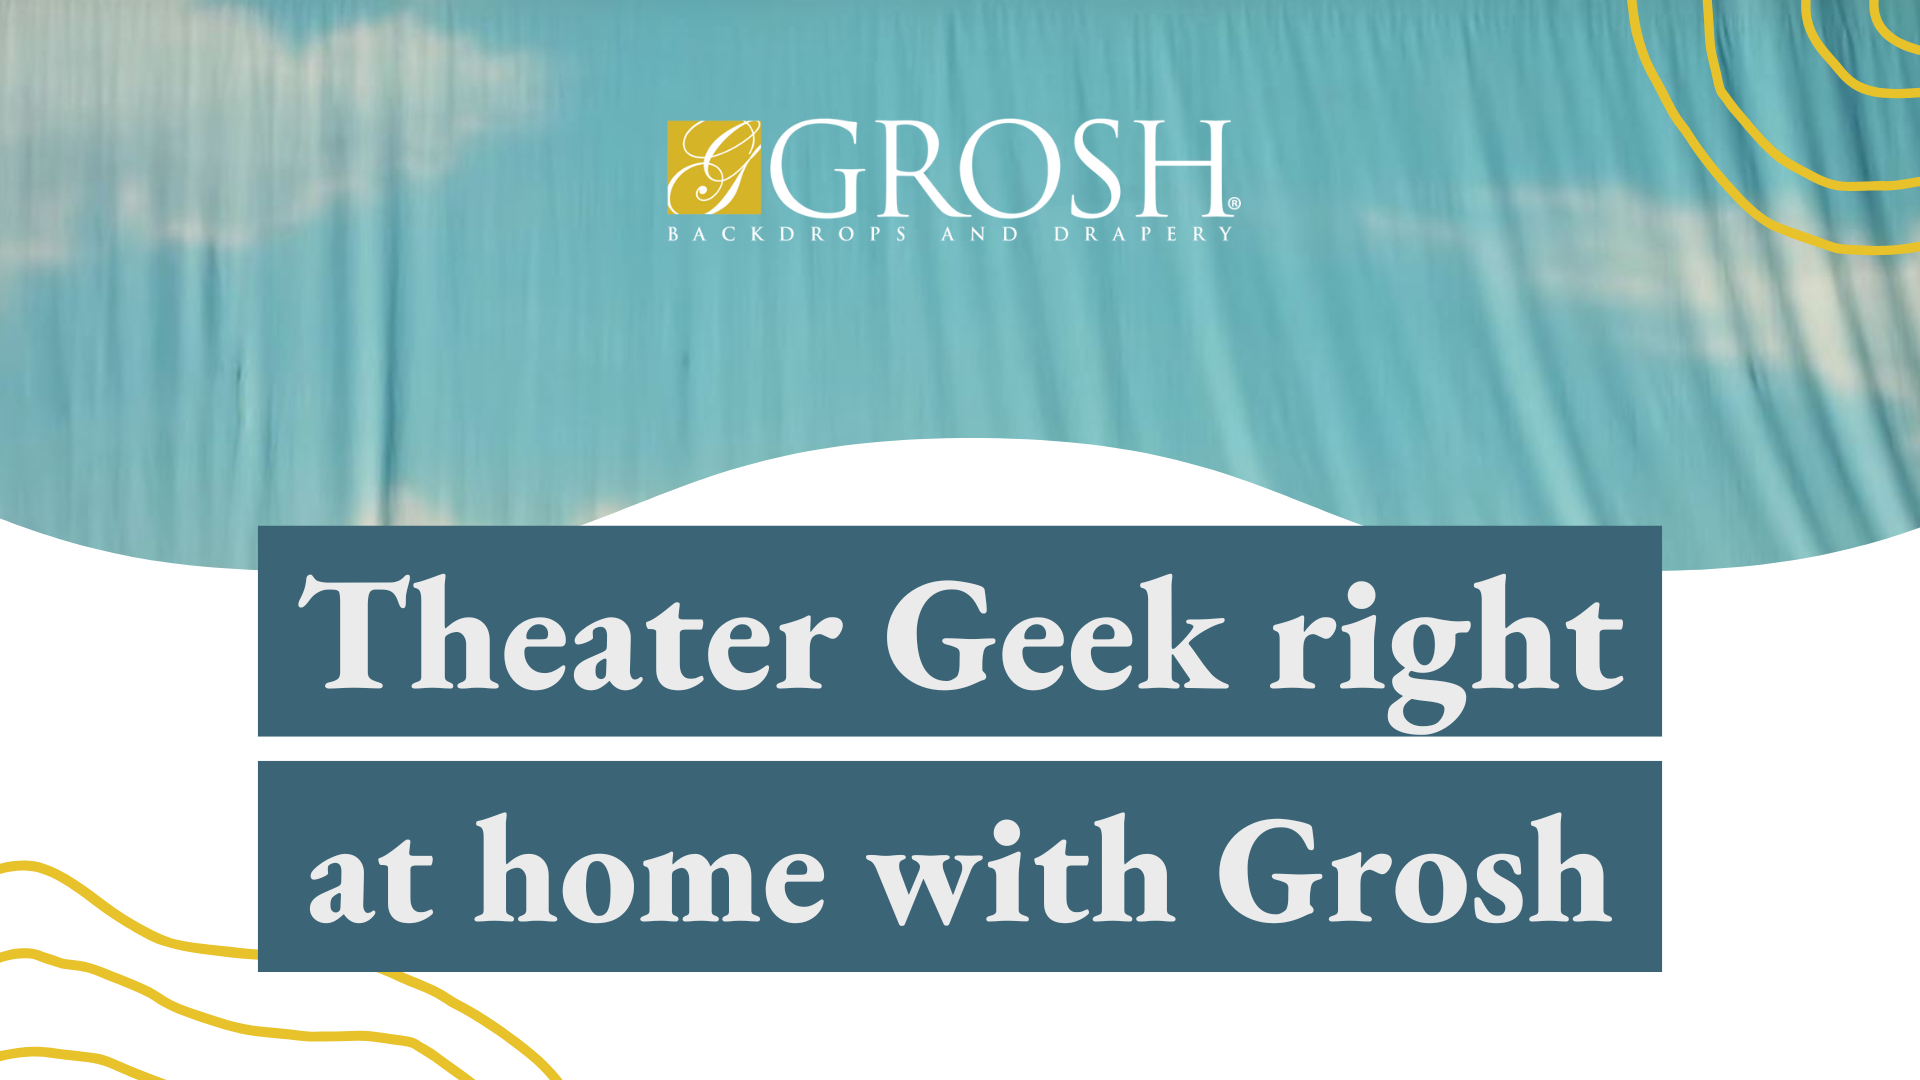 Theater Geek right at home with Grosh